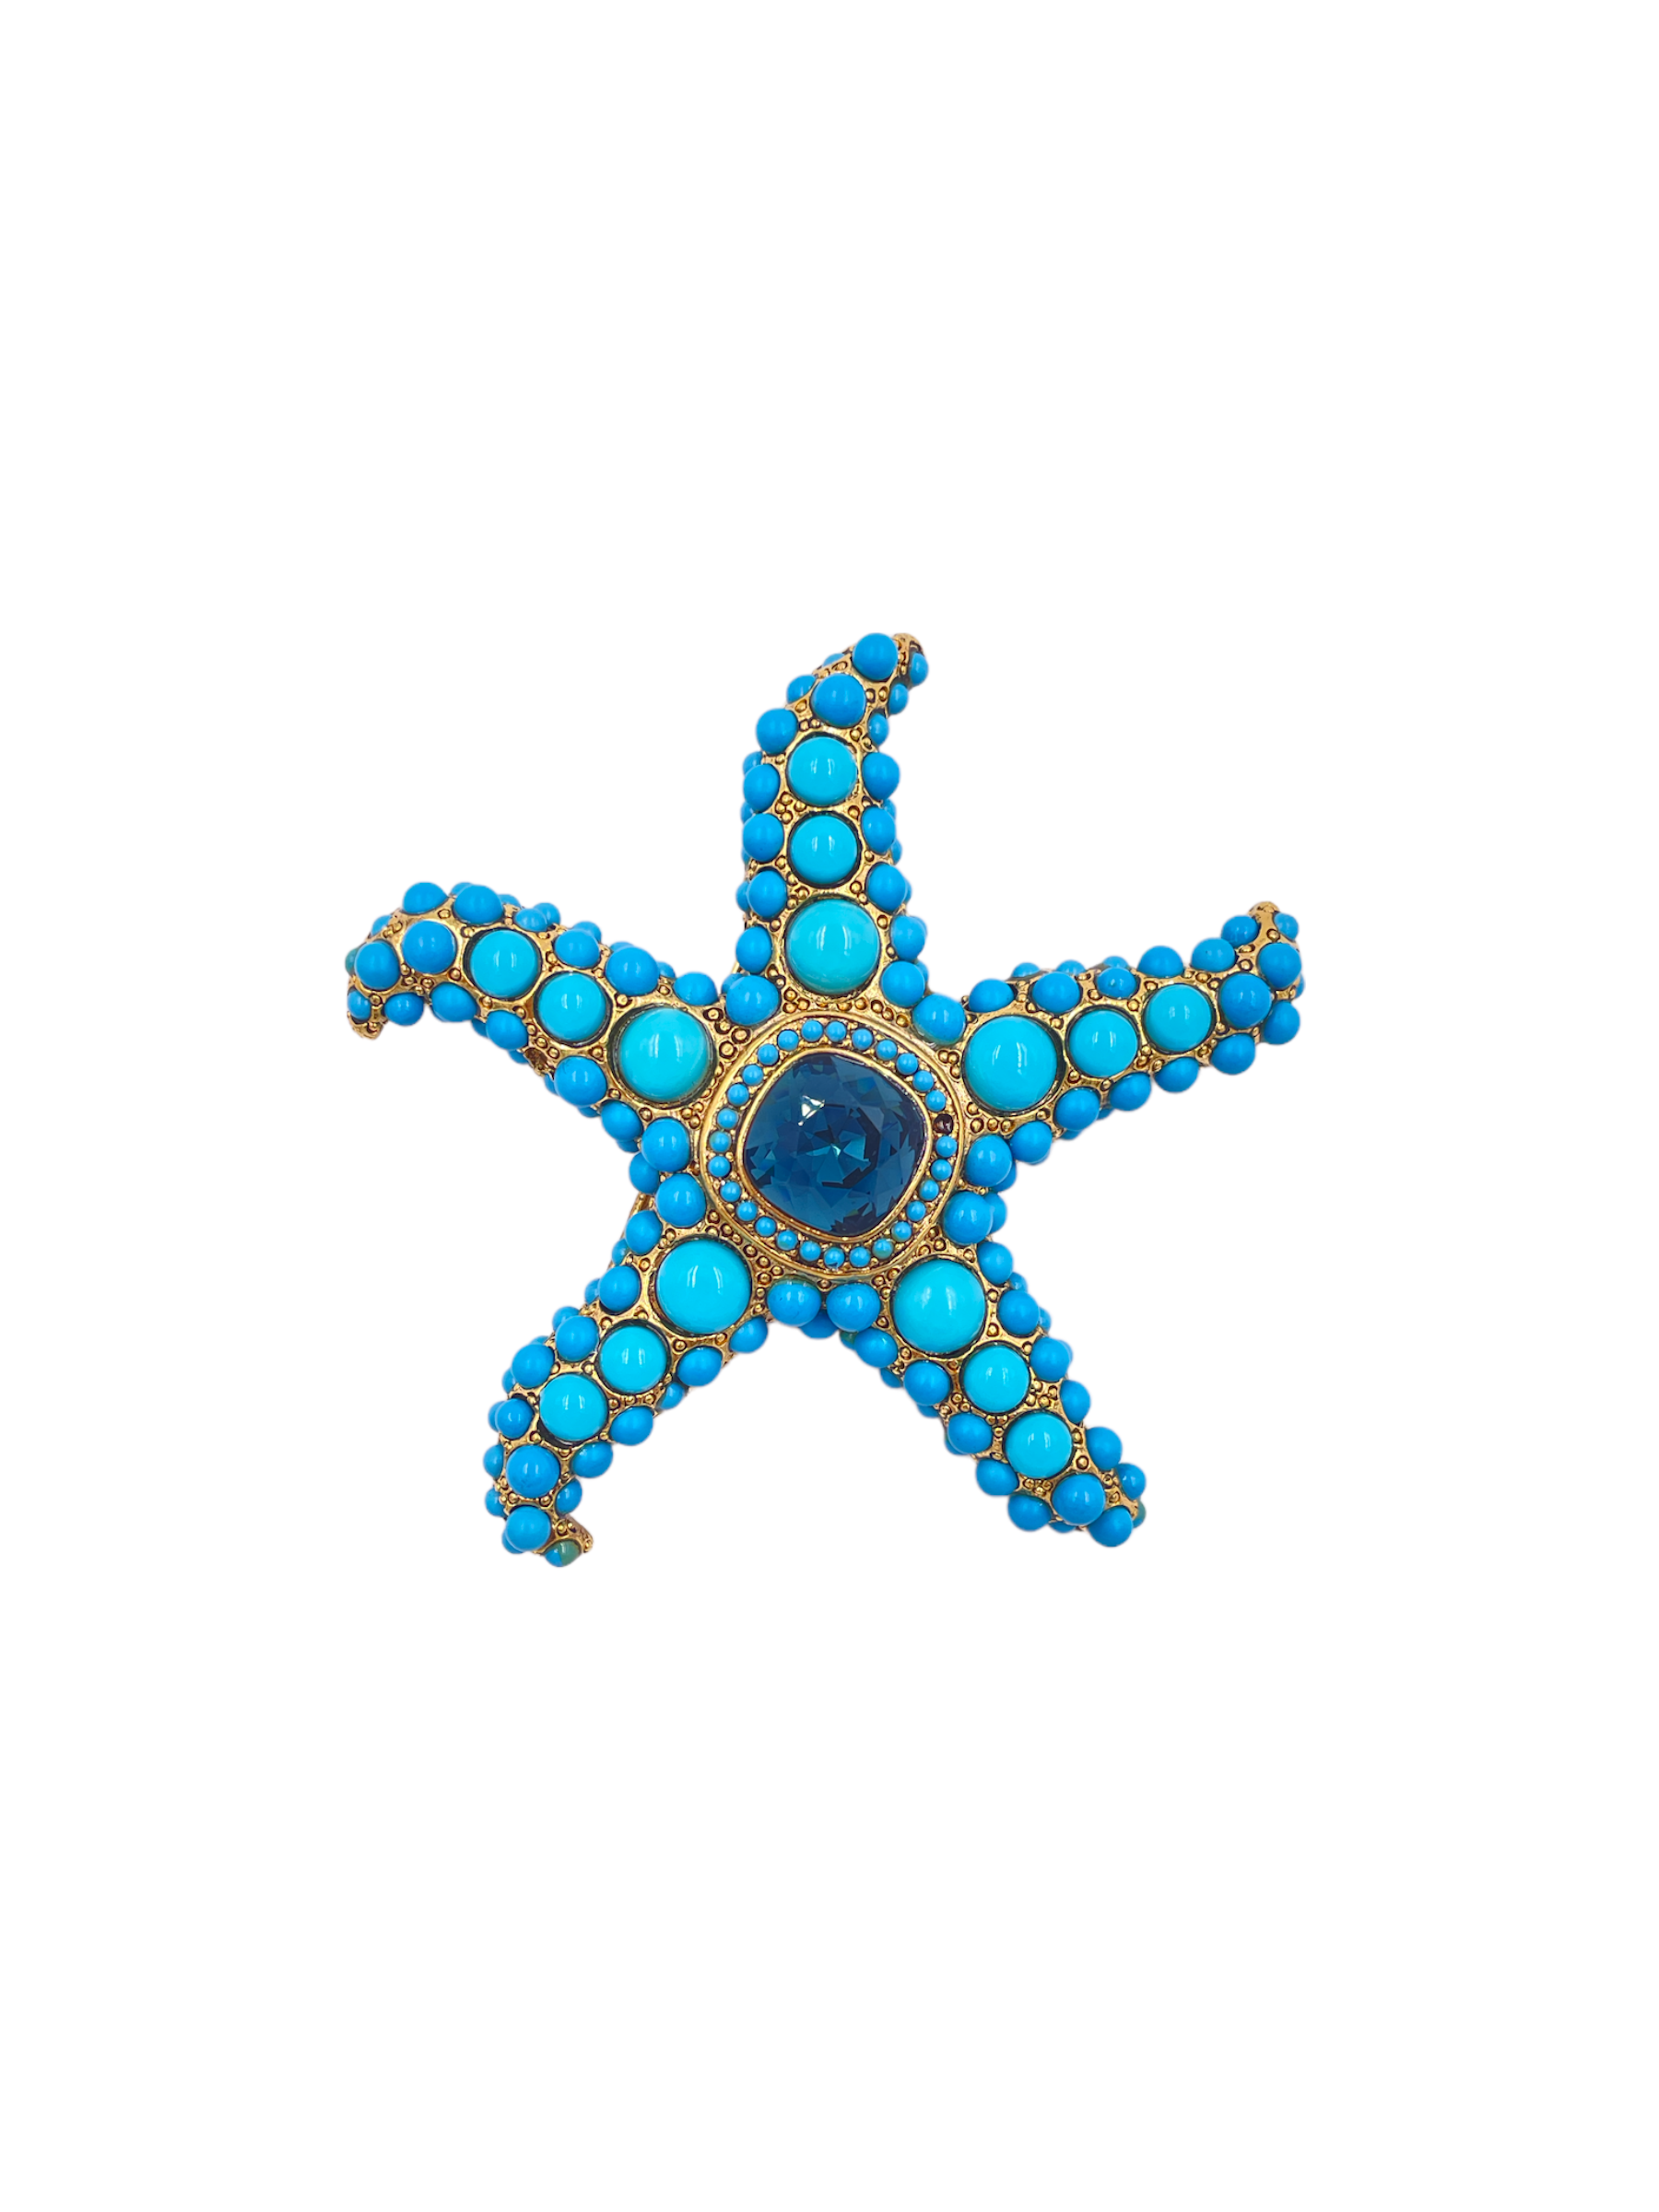 Kenneth Jay Lane Turqouise Star Fish Brooch